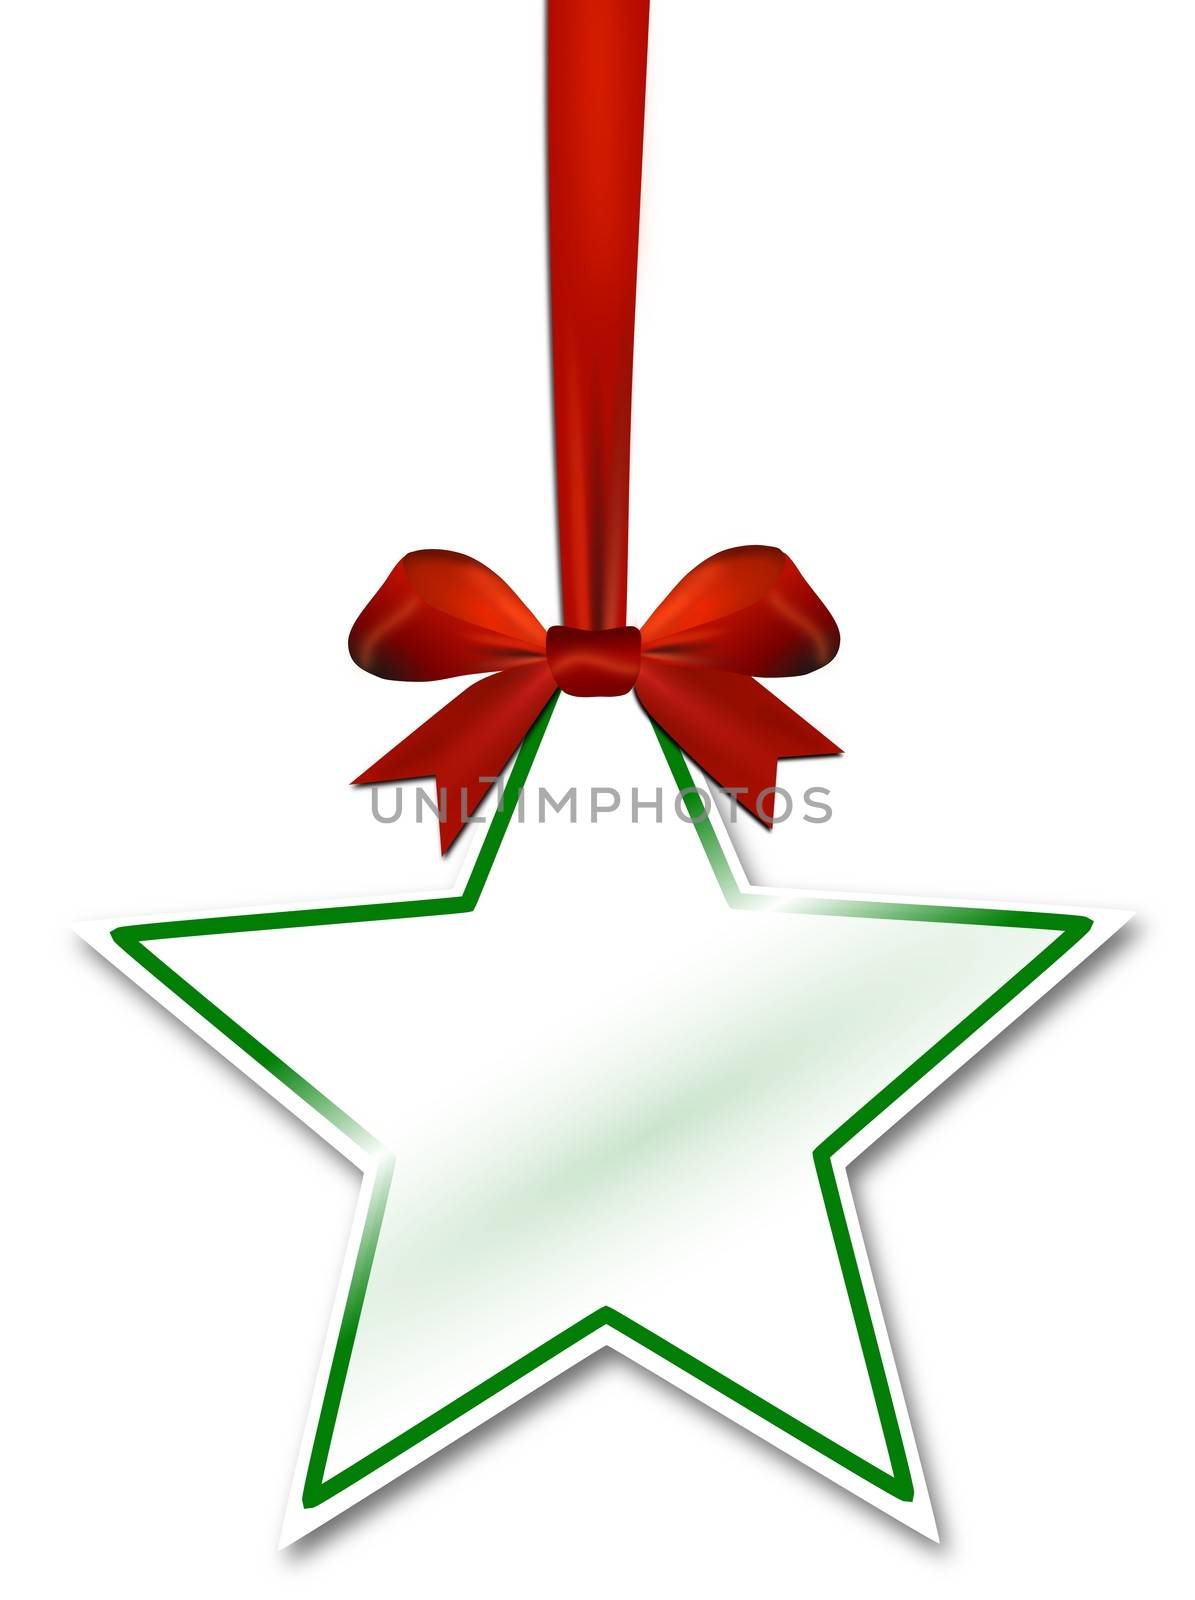 Decorative star with red bow on a white background